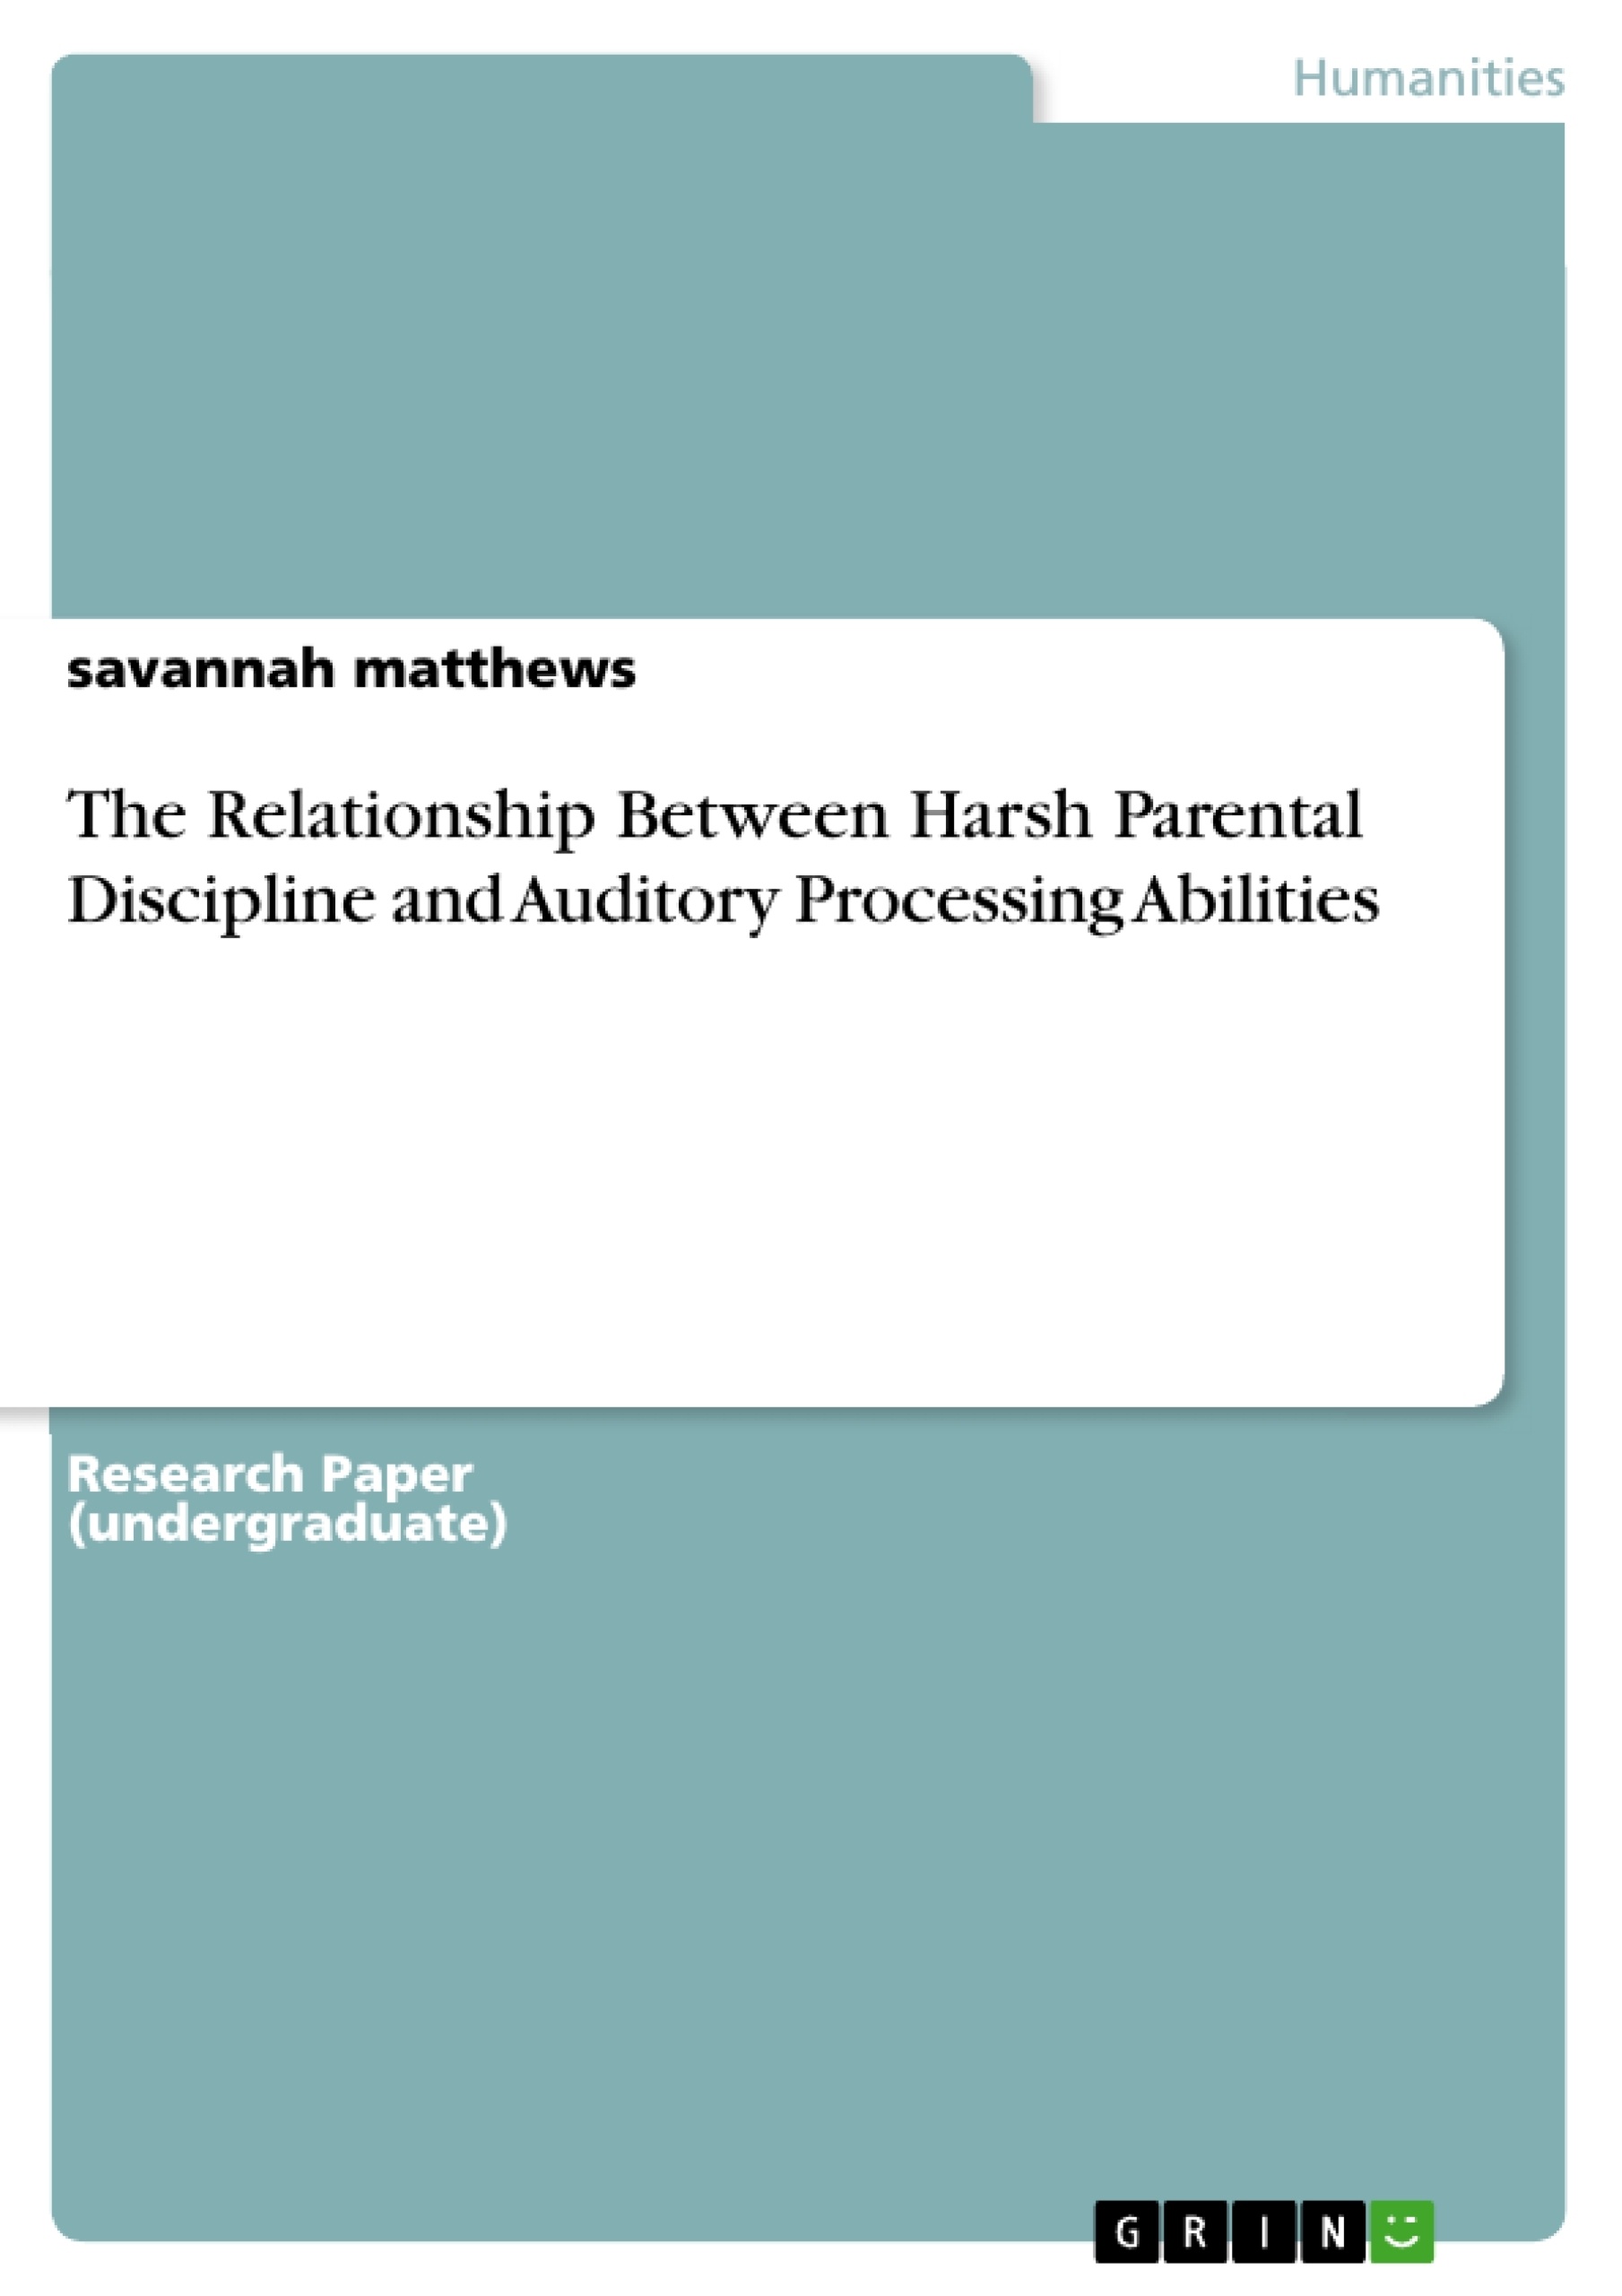 Titre: The Relationship Between Harsh Parental Discipline and Auditory Processing Abilities